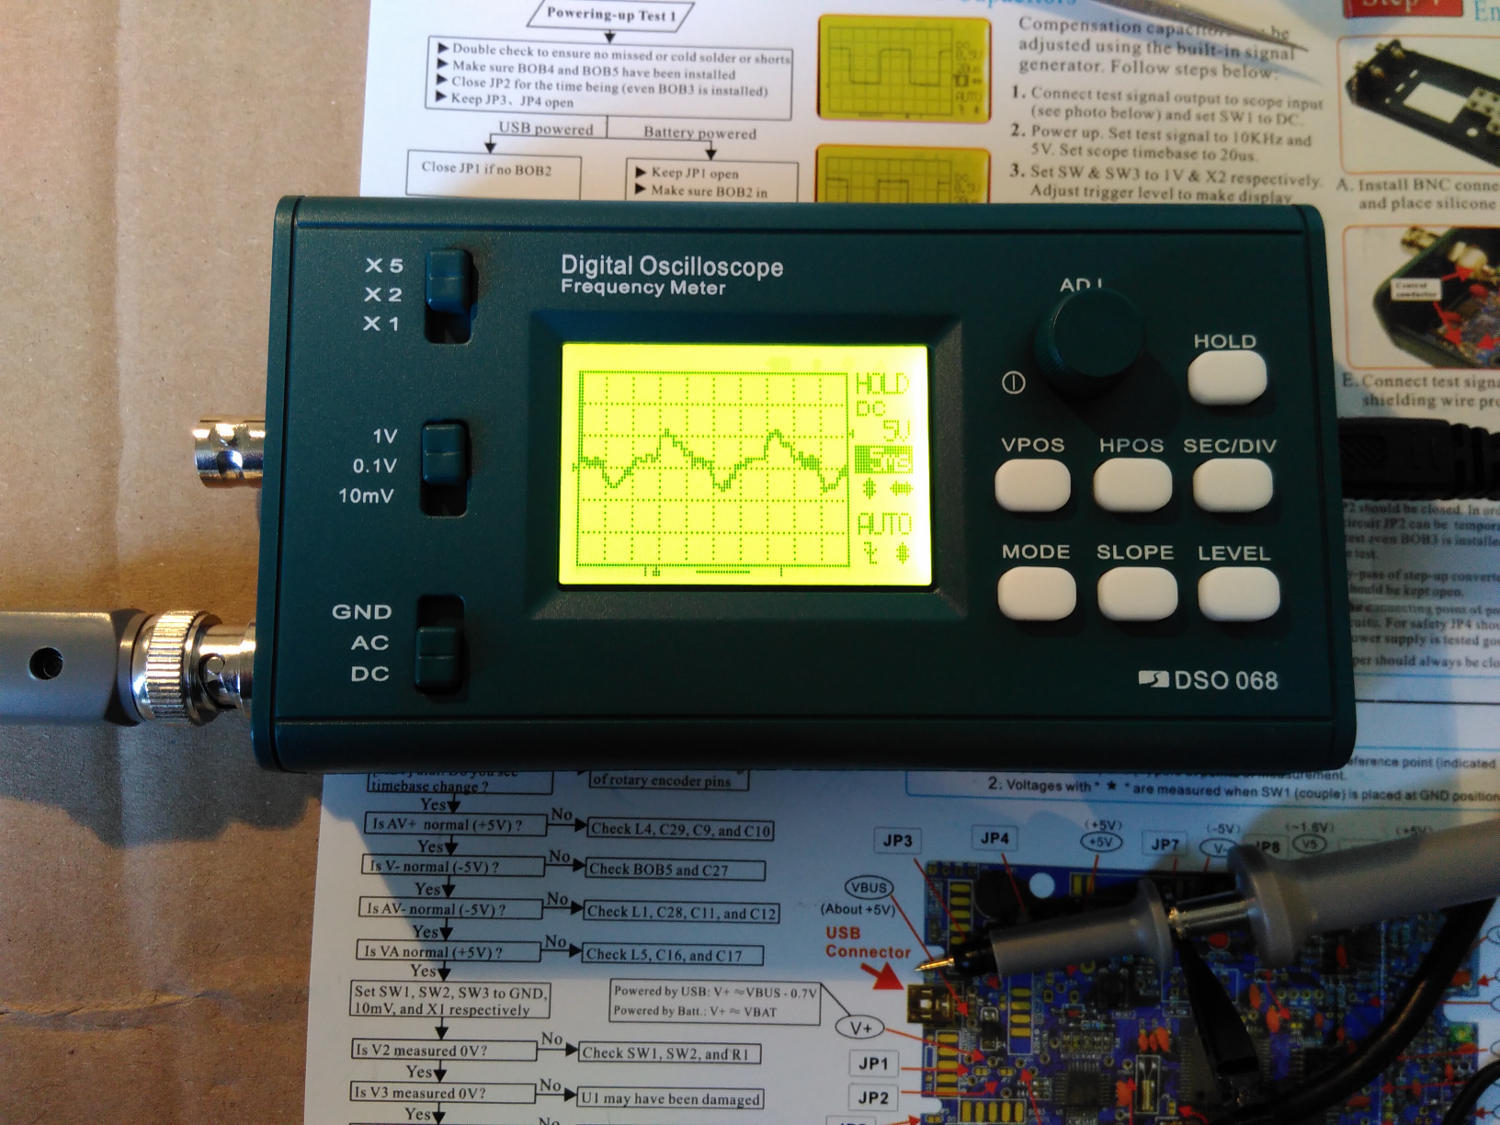 The finished oscilloscope, displaying mains hum at 50 Hz